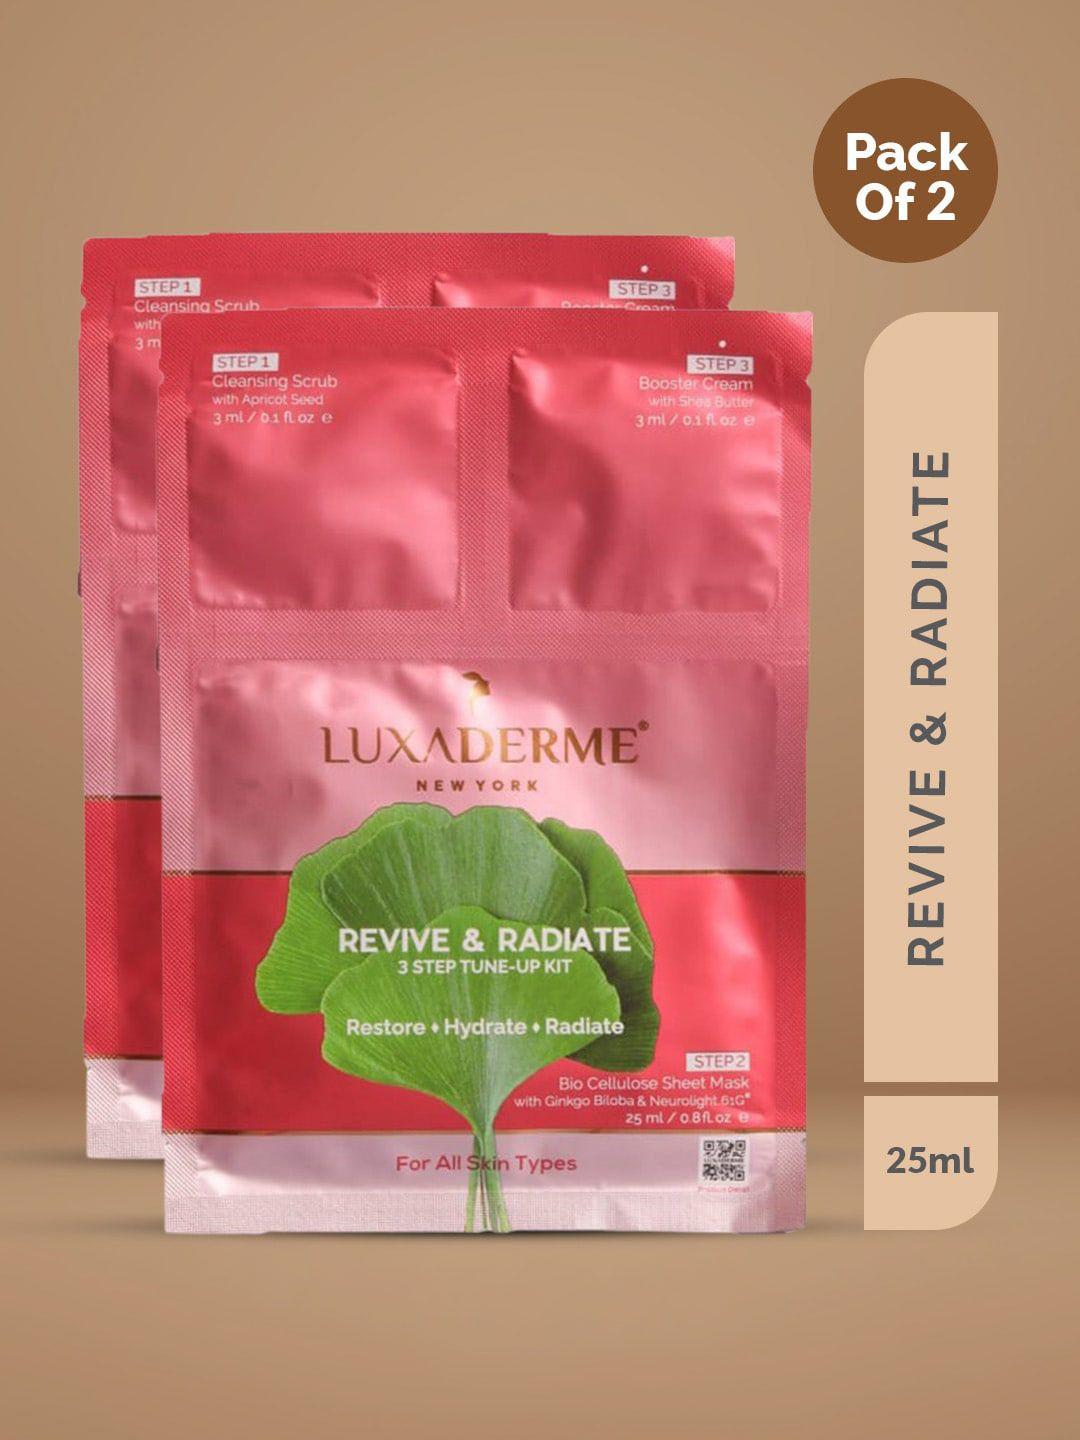 luxaderme set of 2 revive & radiate 3-step tune-up facial kit - 25ml each